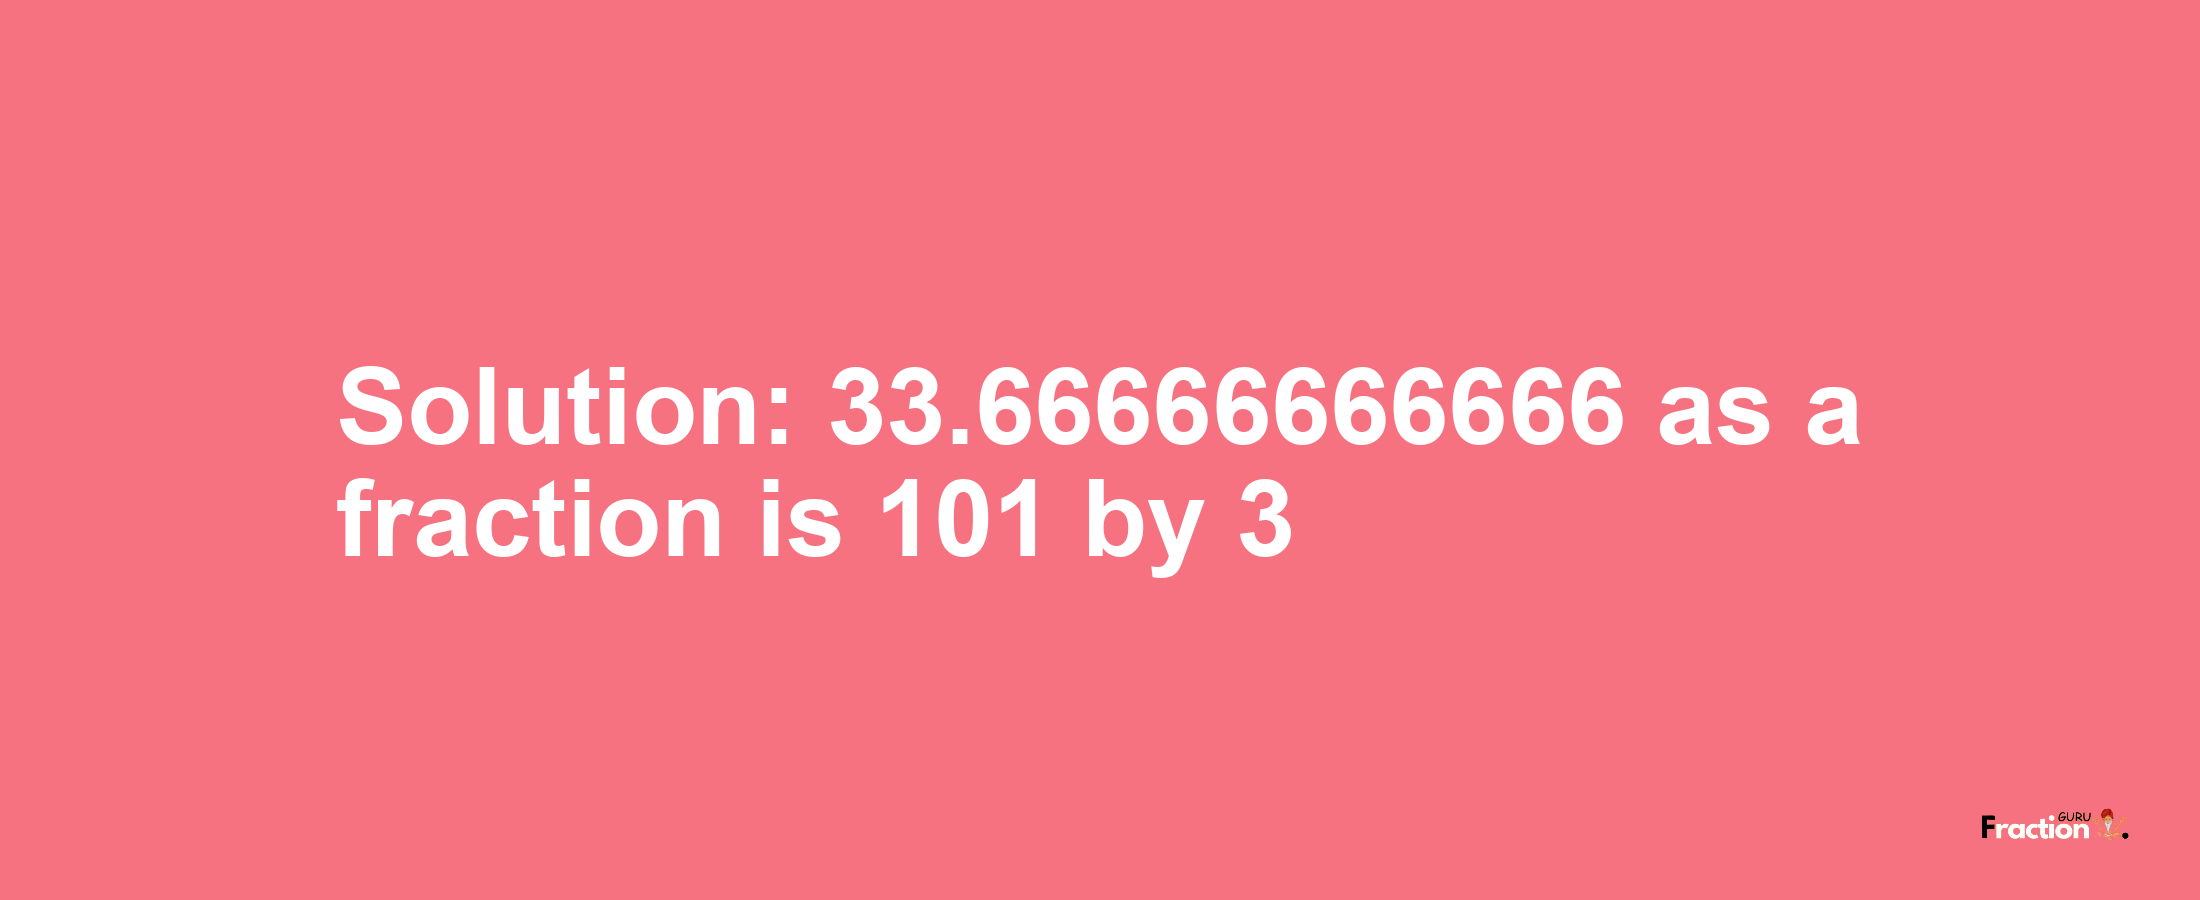 Solution:33.66666666666 as a fraction is 101/3